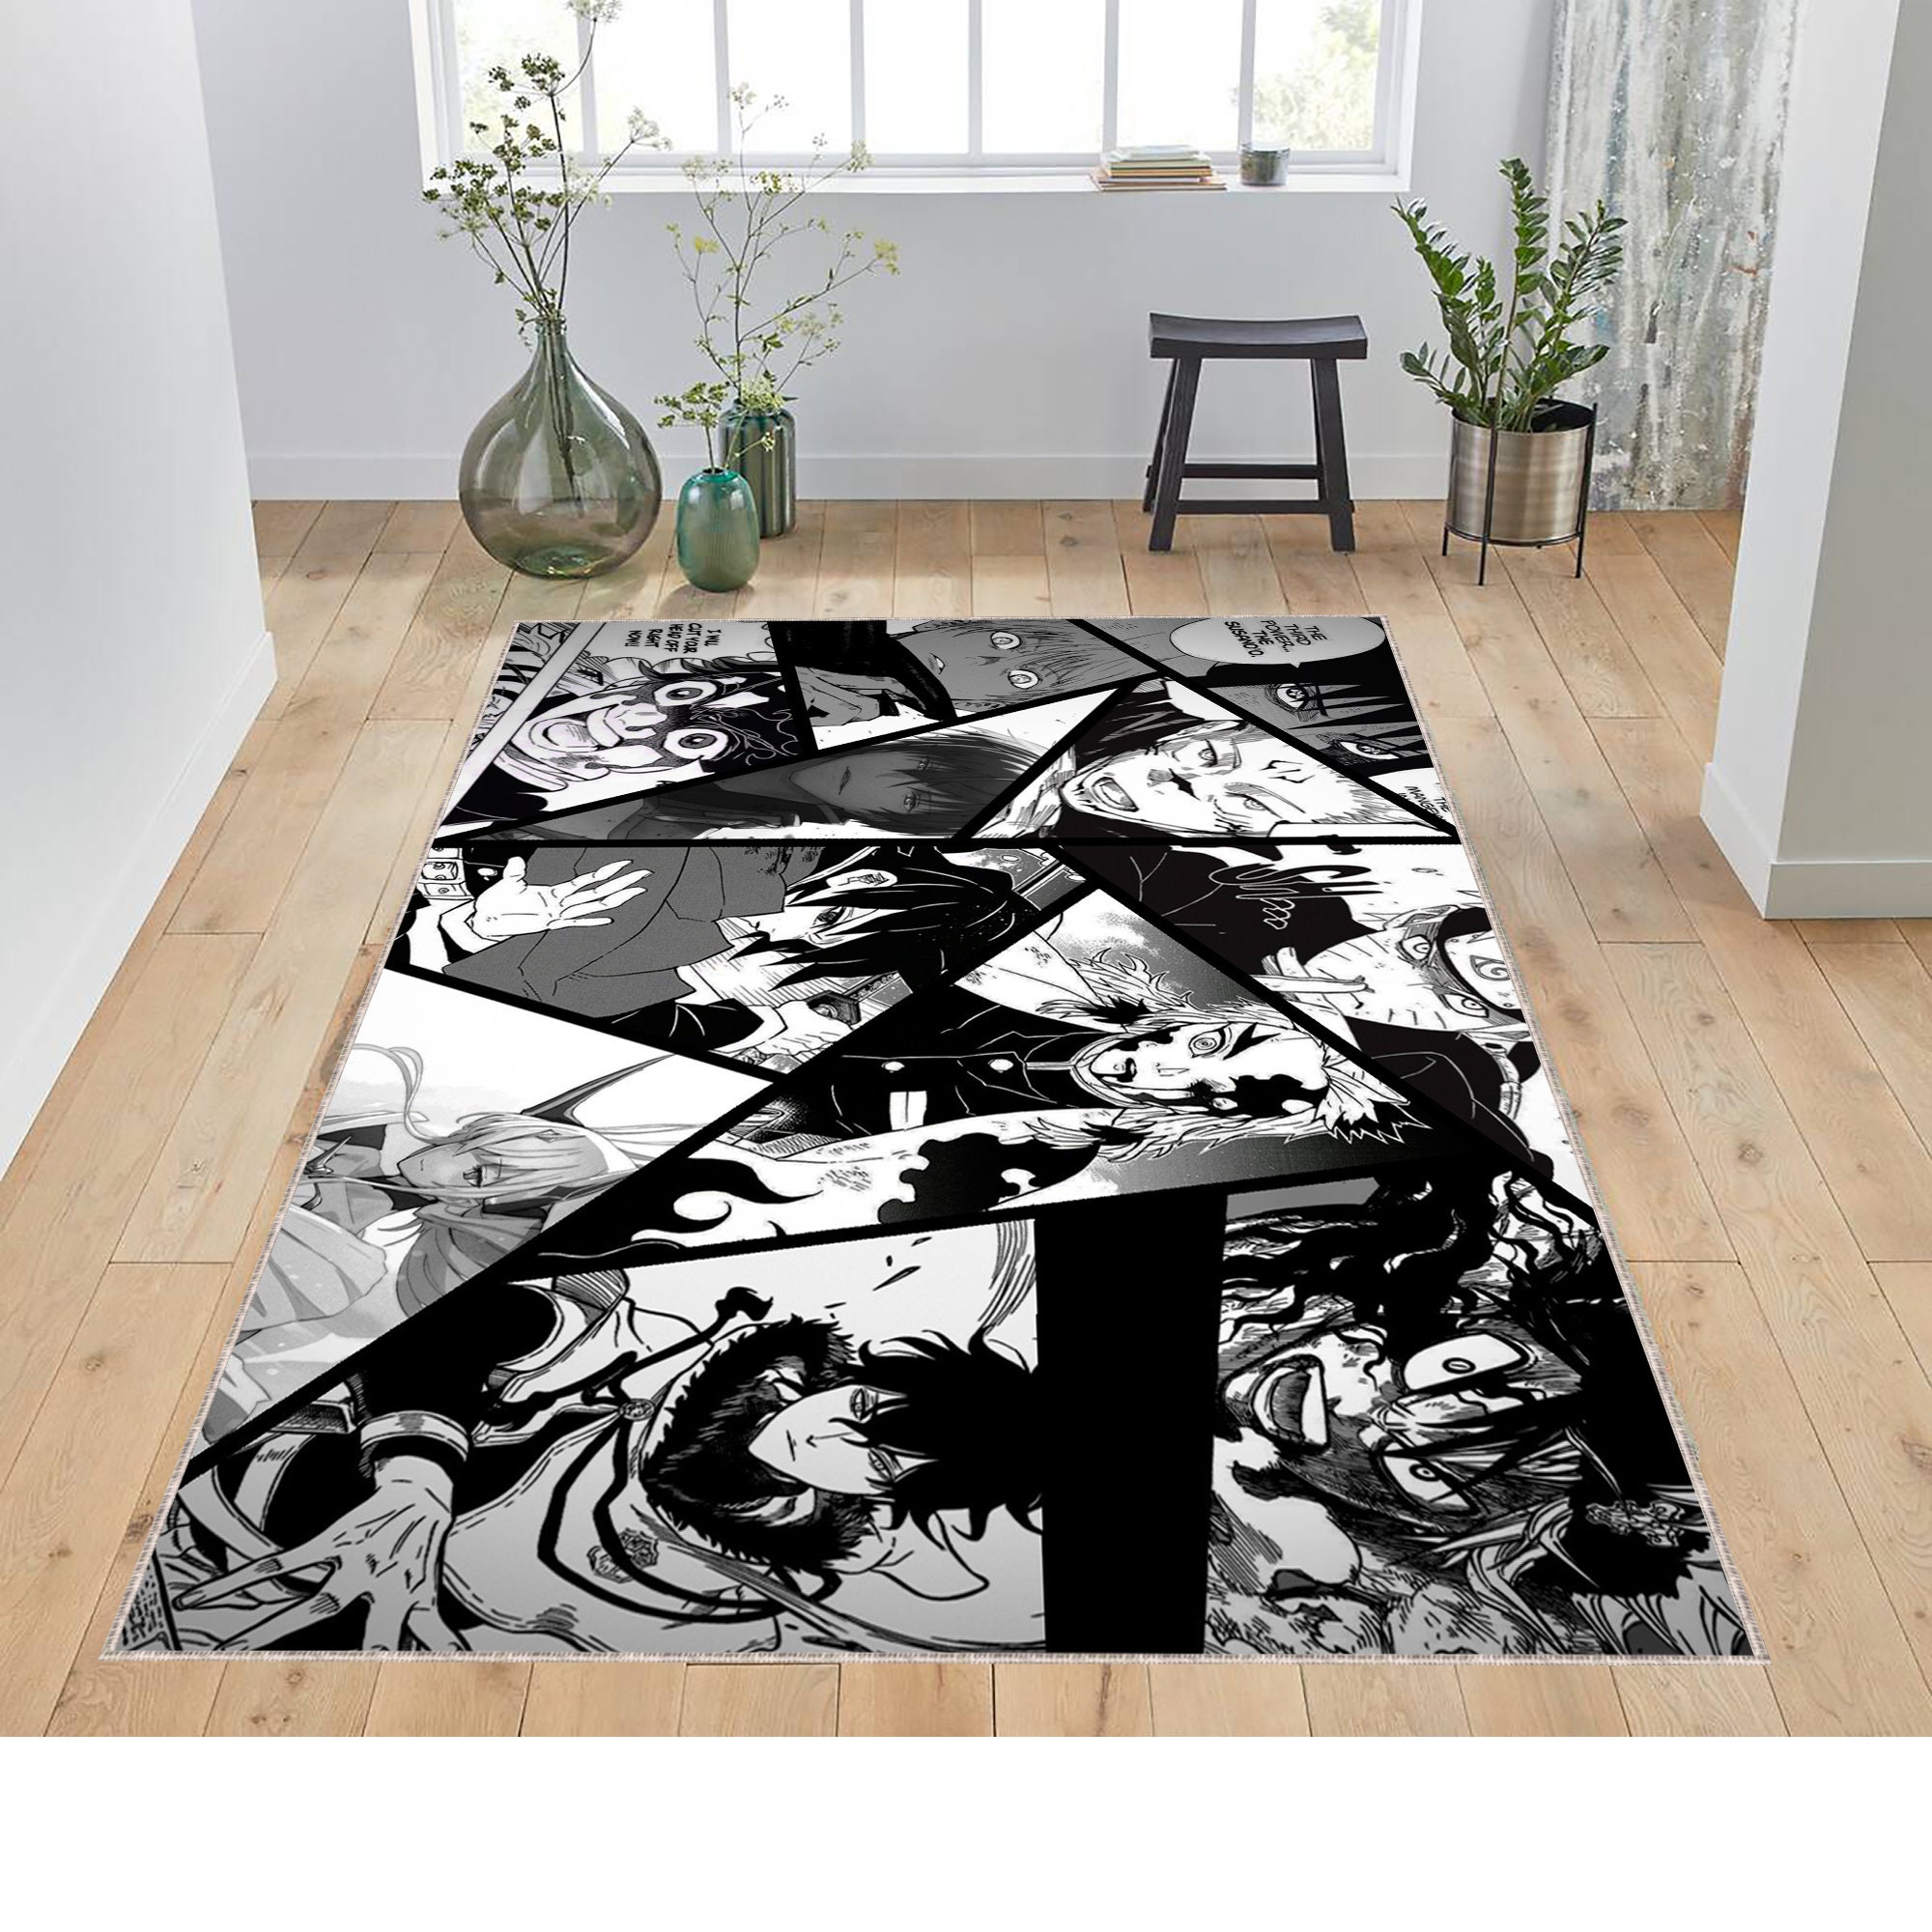 Shanks One Piece Anime Area Rug Carpet  Dragon Ball Z Tee Shirt Pr141680  in 2023  Rugs on carpet Colorful rugs Area rugs